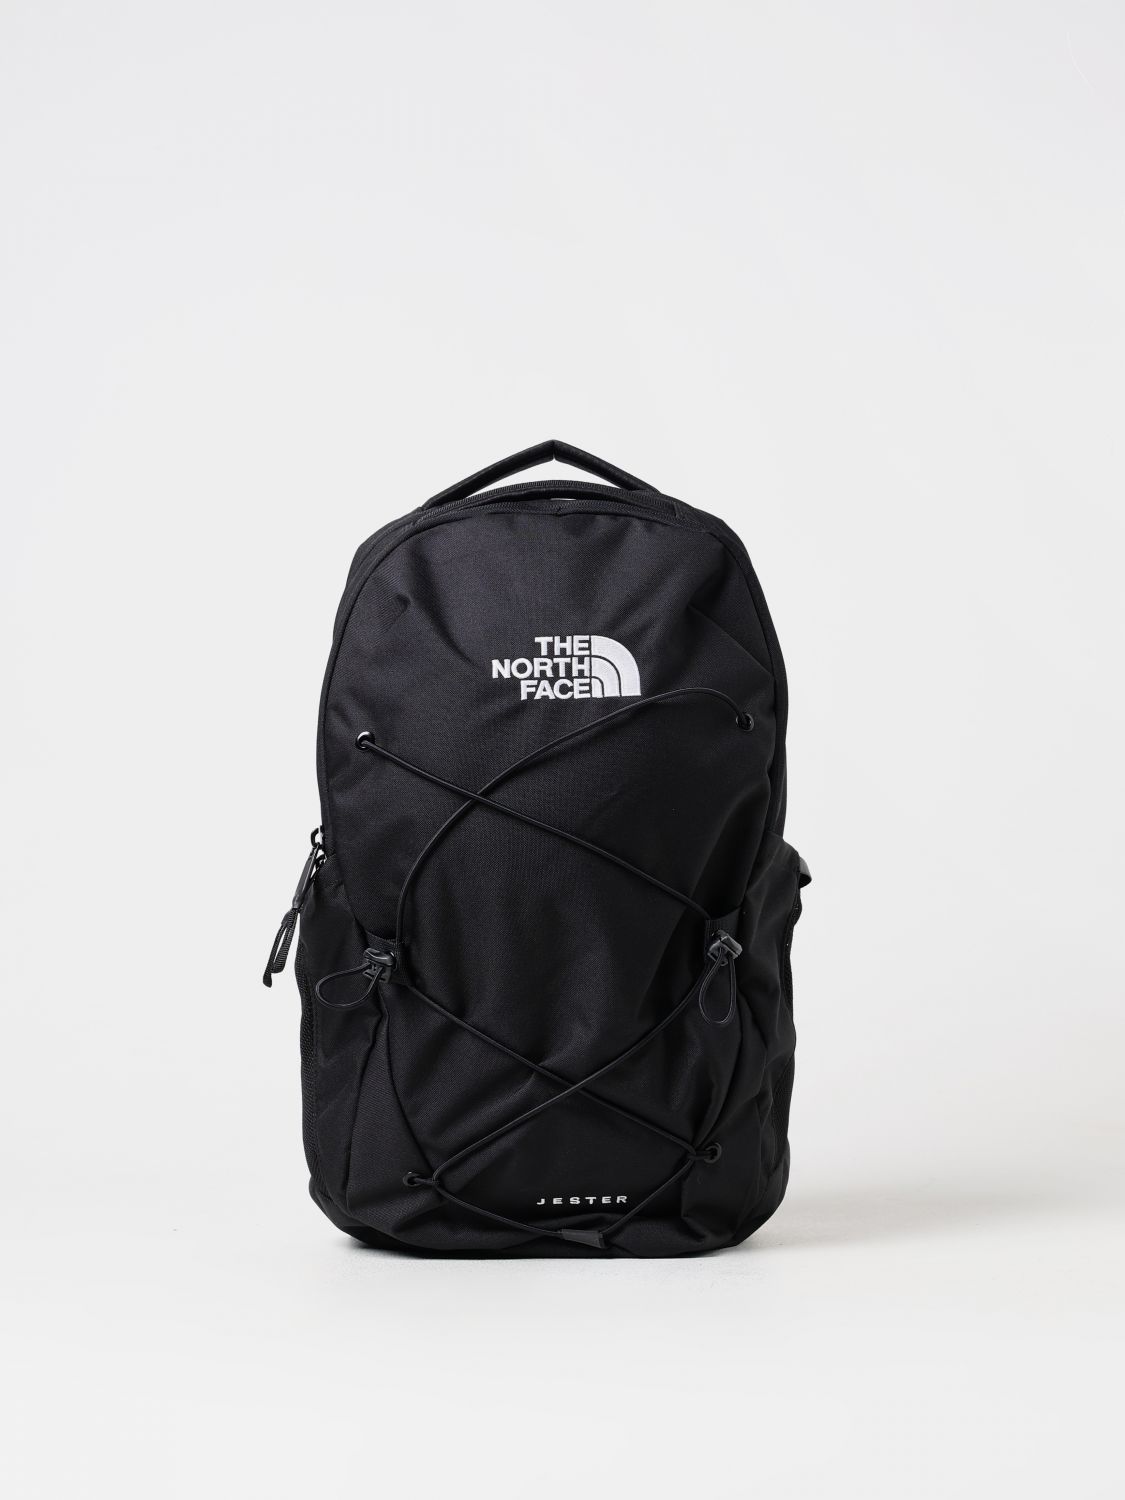 The North Face Backpack THE NORTH FACE Men color Black